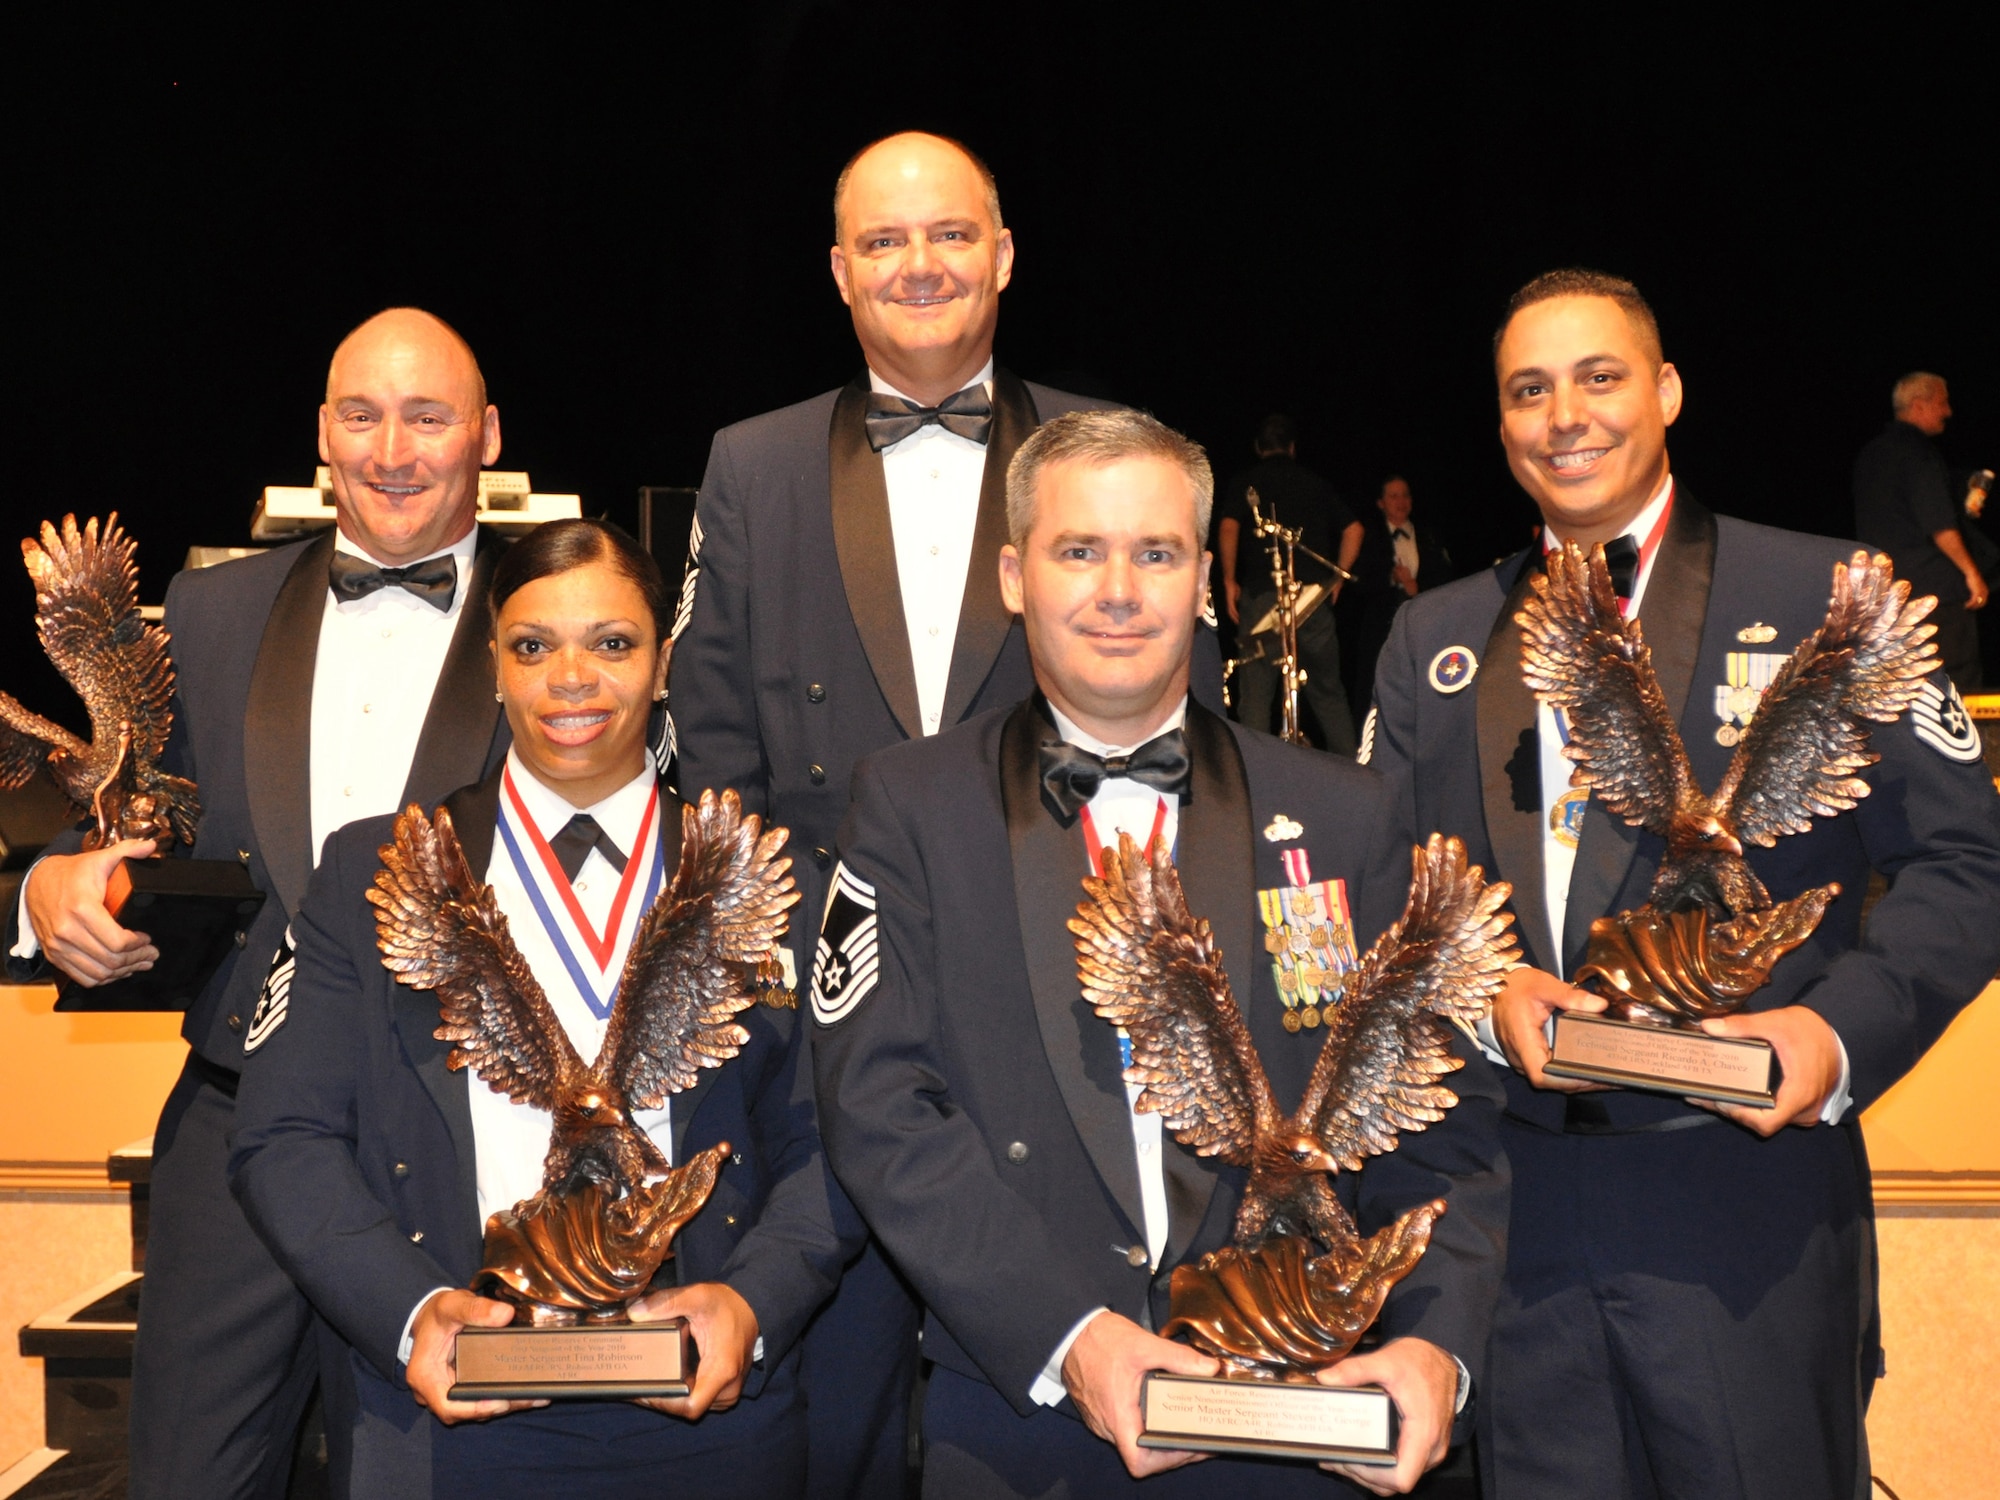 KISSIMMEE, Fla. -- Air Force Reserve Command honored its Outstanding Airmen of 2010 during an awards banquet here Aug. 16, 2011. AFRC Command Chief Master Sgt. Dwight Badgett (center) stands with honorees, from left, Chief Master Sgt. Leon Alexander, who accepted the Outstanding Airman Award on behalf of Staff Sgt. Michael D. Campbell, who is currently deployed; Tech Sgt. Ricardo A. Chavez, Outstanding NCO; Master Sgt. Tina Robinson, Outstanding First Sergeant; and Senior Master Sgt. Steven C. George, Outstanding Senior NCO. (U.S. Air Force photo/Philip Rhodes)